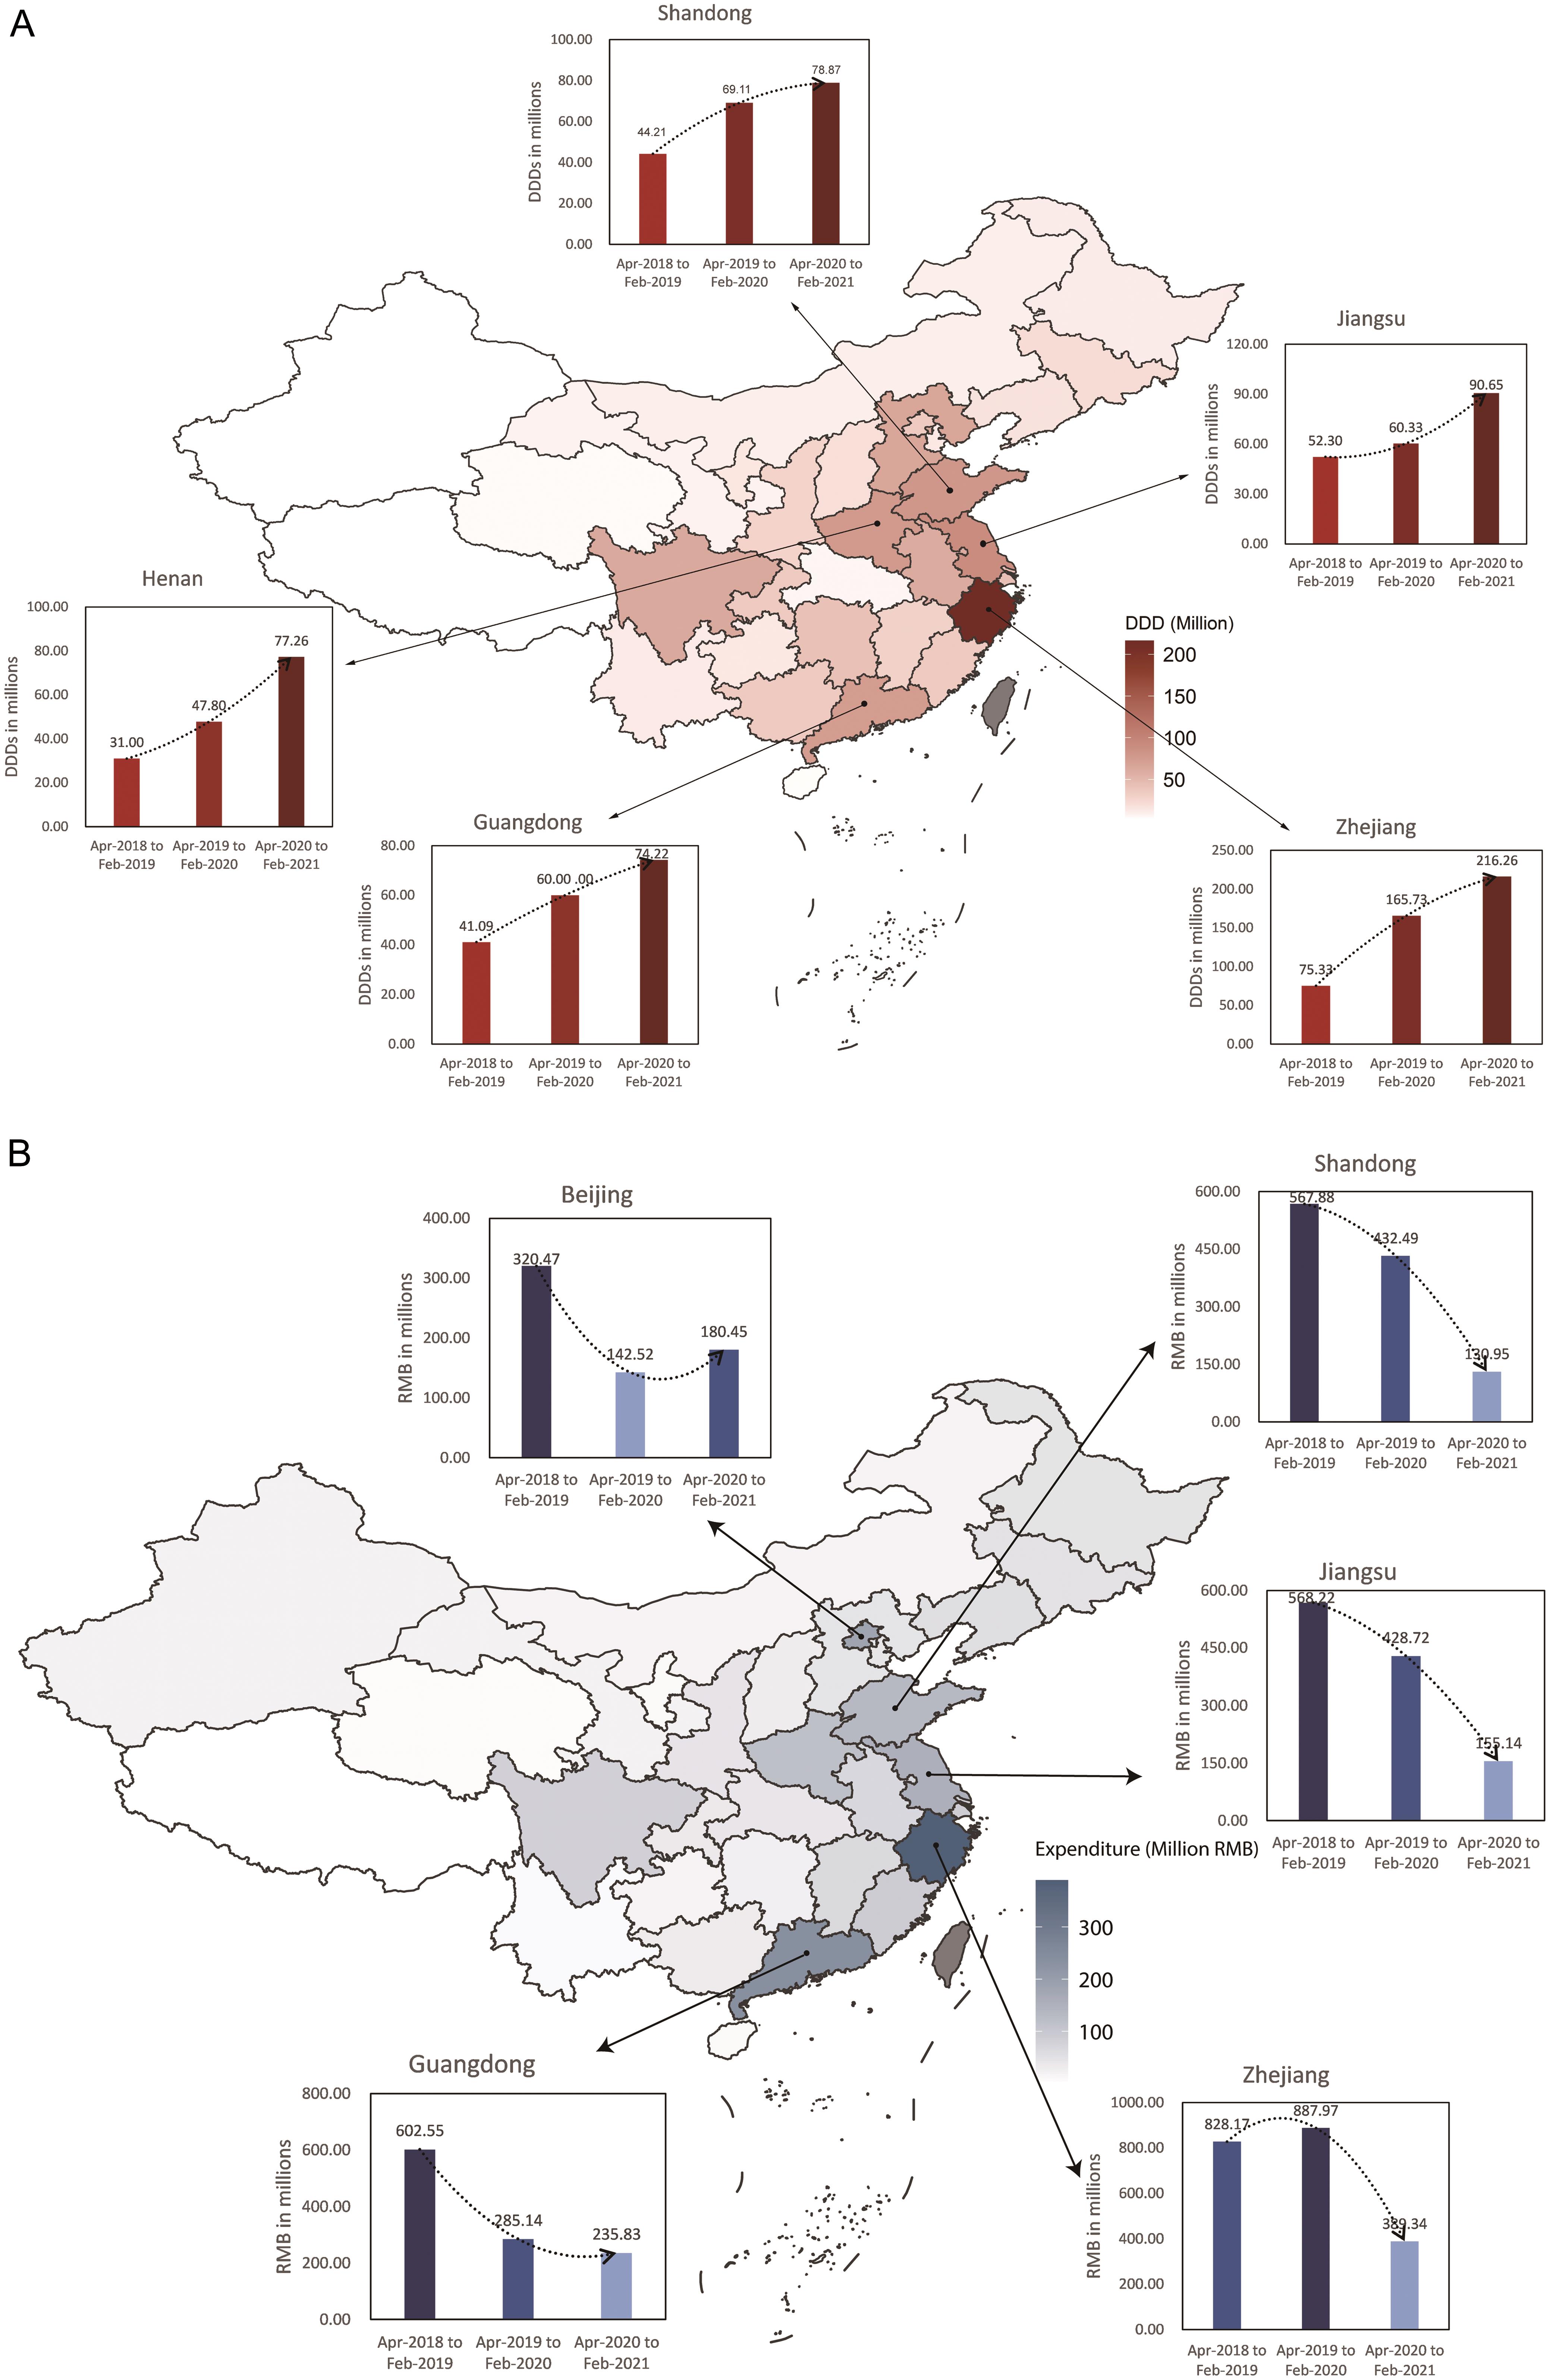 Purchase volume (A) and expenditures (B) of hepatitis B antiviral drugs 2 years after implementing the NCDP policy by provinces in China.